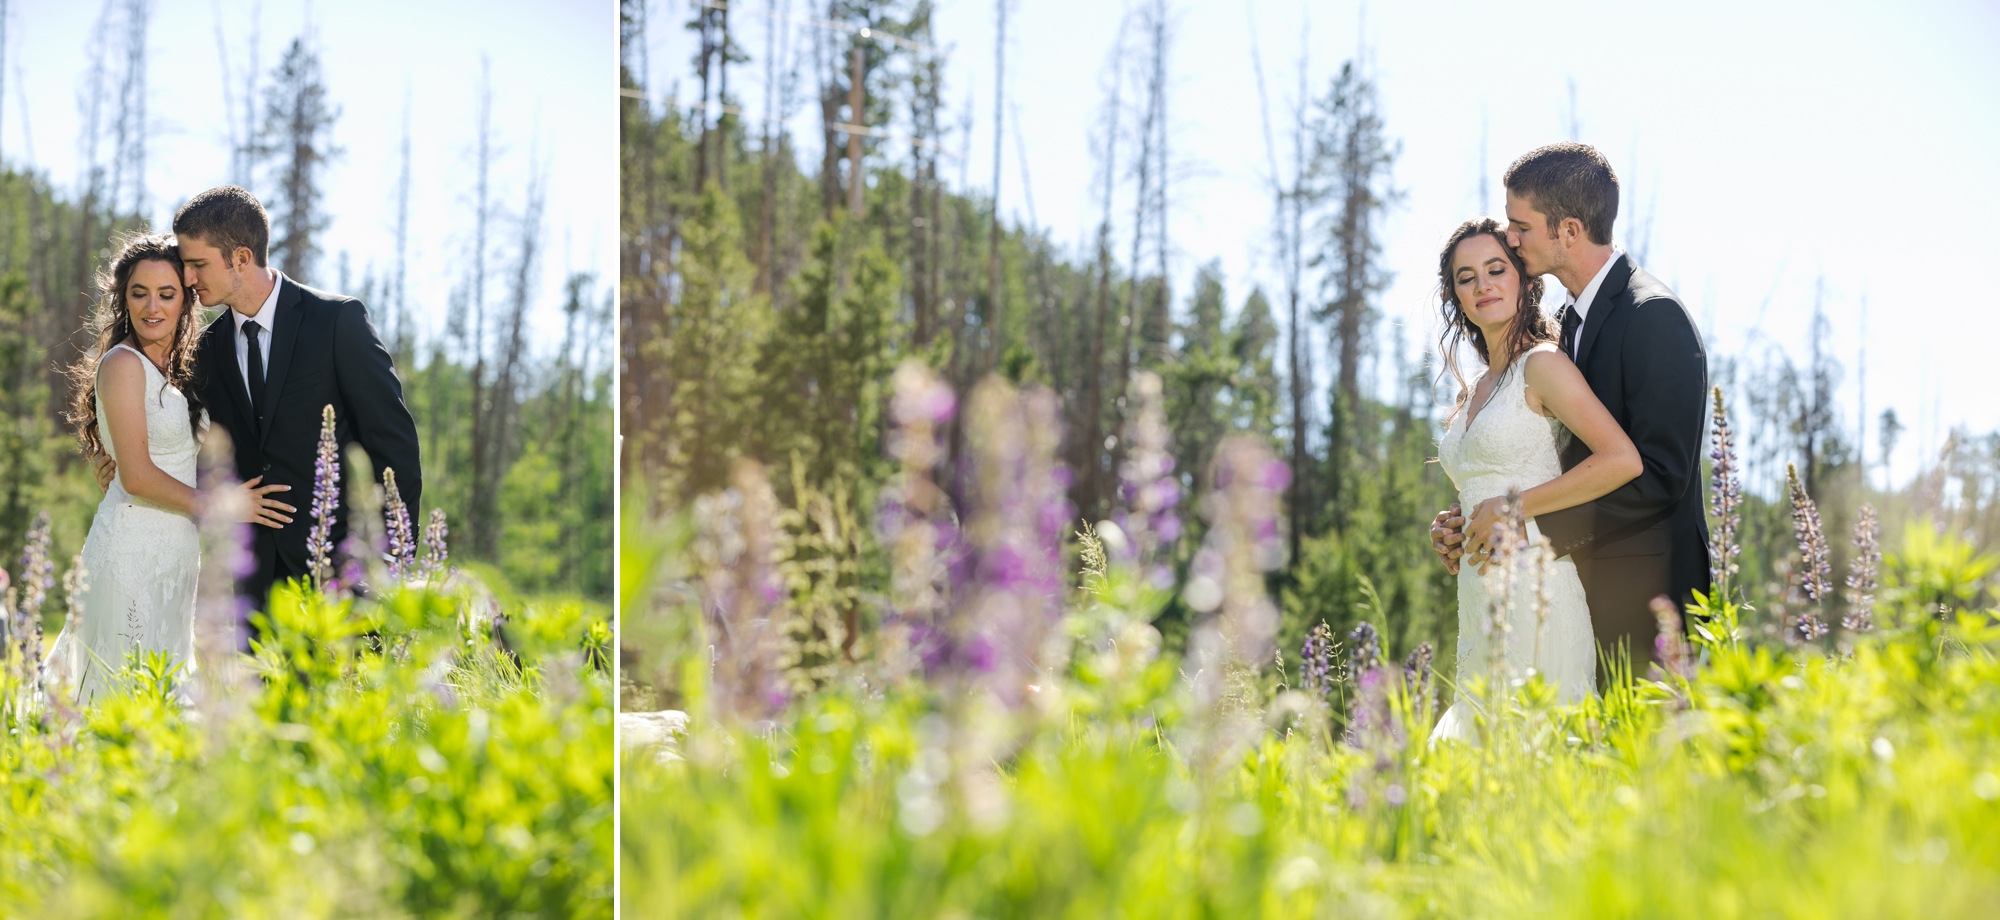 newlywed portraits in wildflower meadow in Colorado mountains